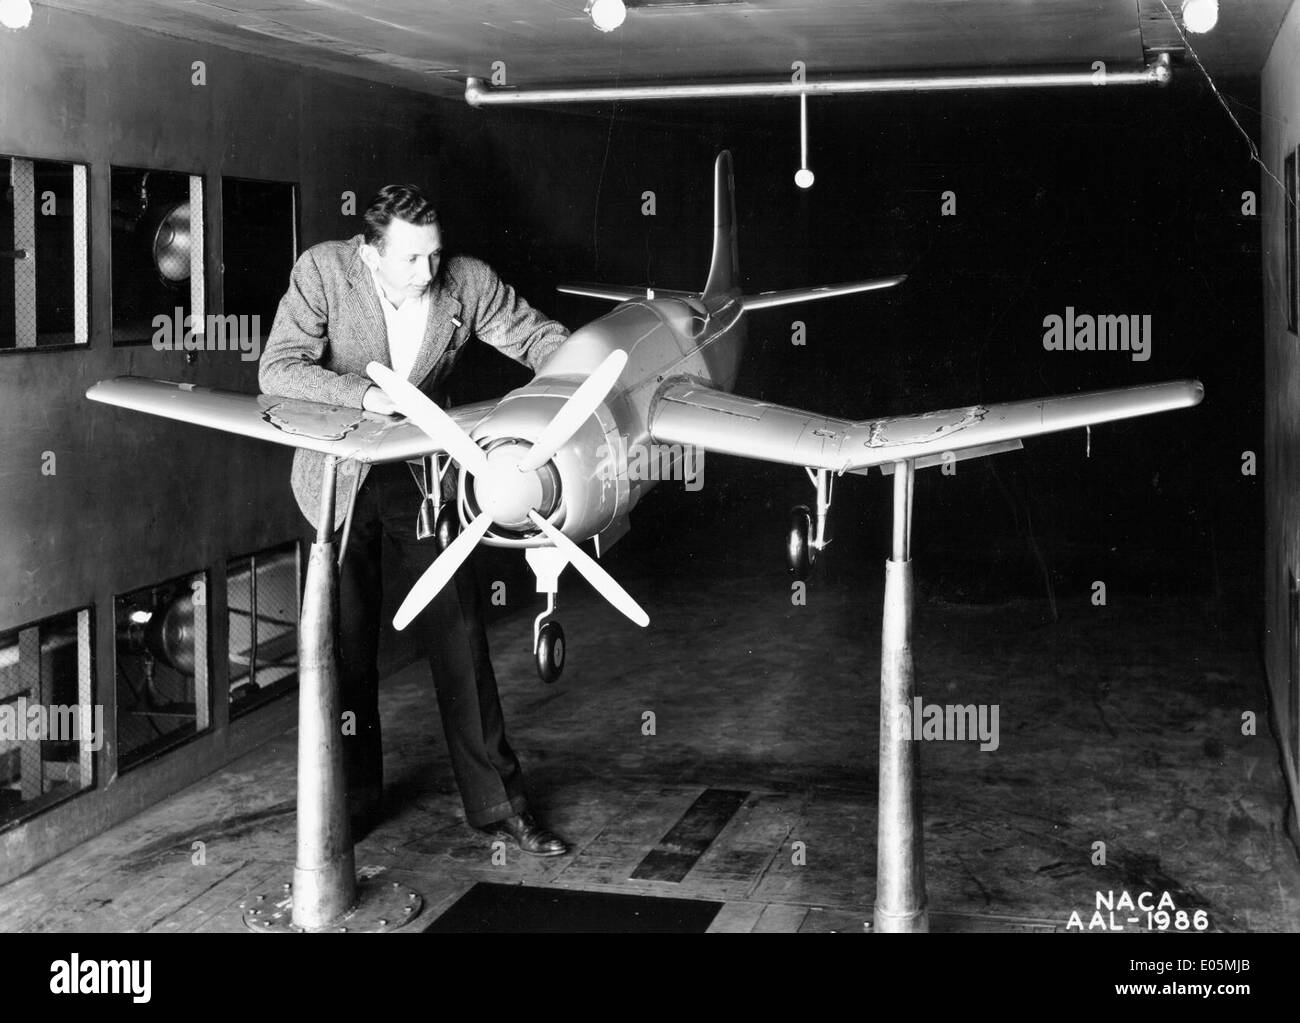 Le NACA Ames 7x10 Wind Tunnel Banque D'Images